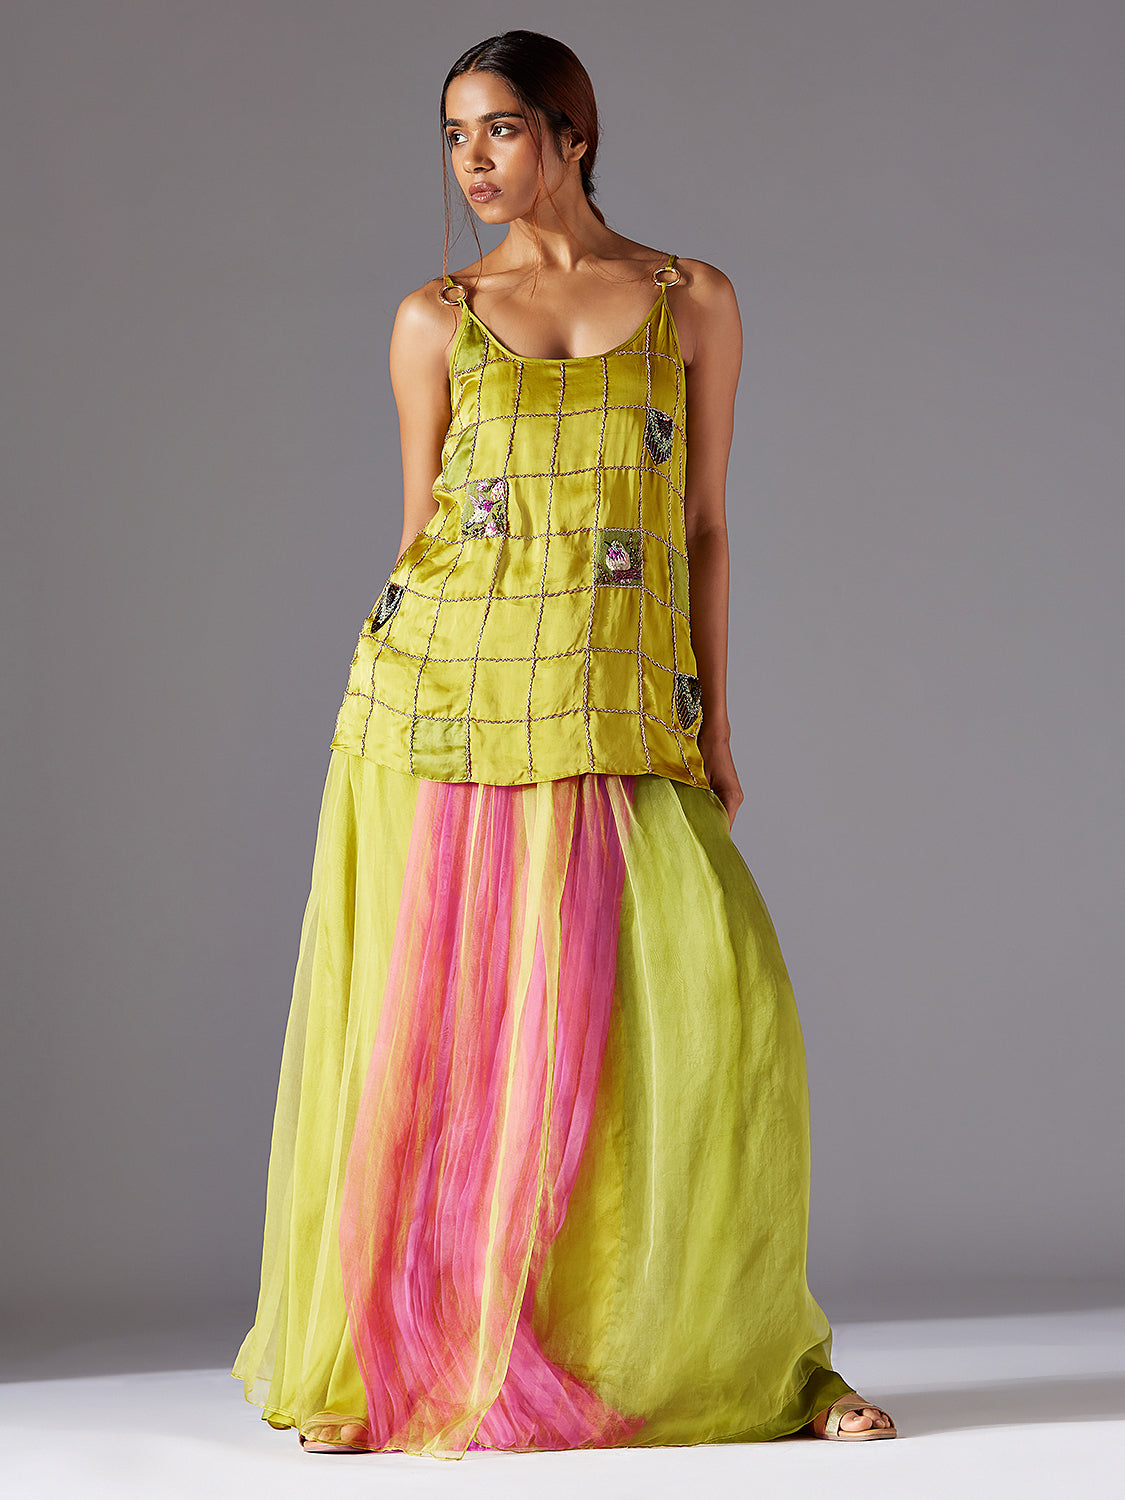 Machair Spaghetti Top With Colorblocked Organza Skirt